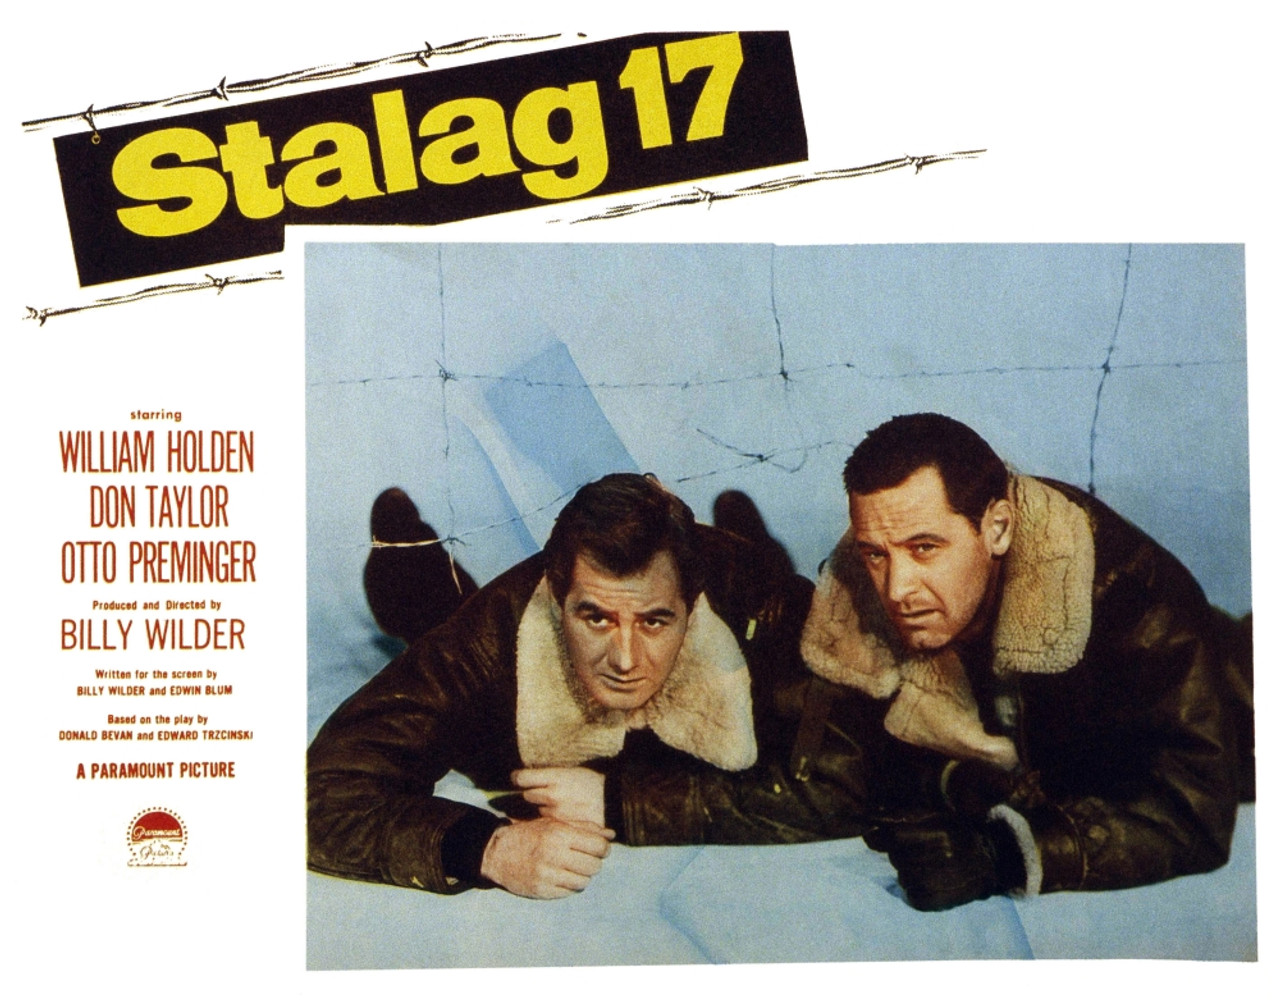 Graphic image of the movie poster for Stalag 17